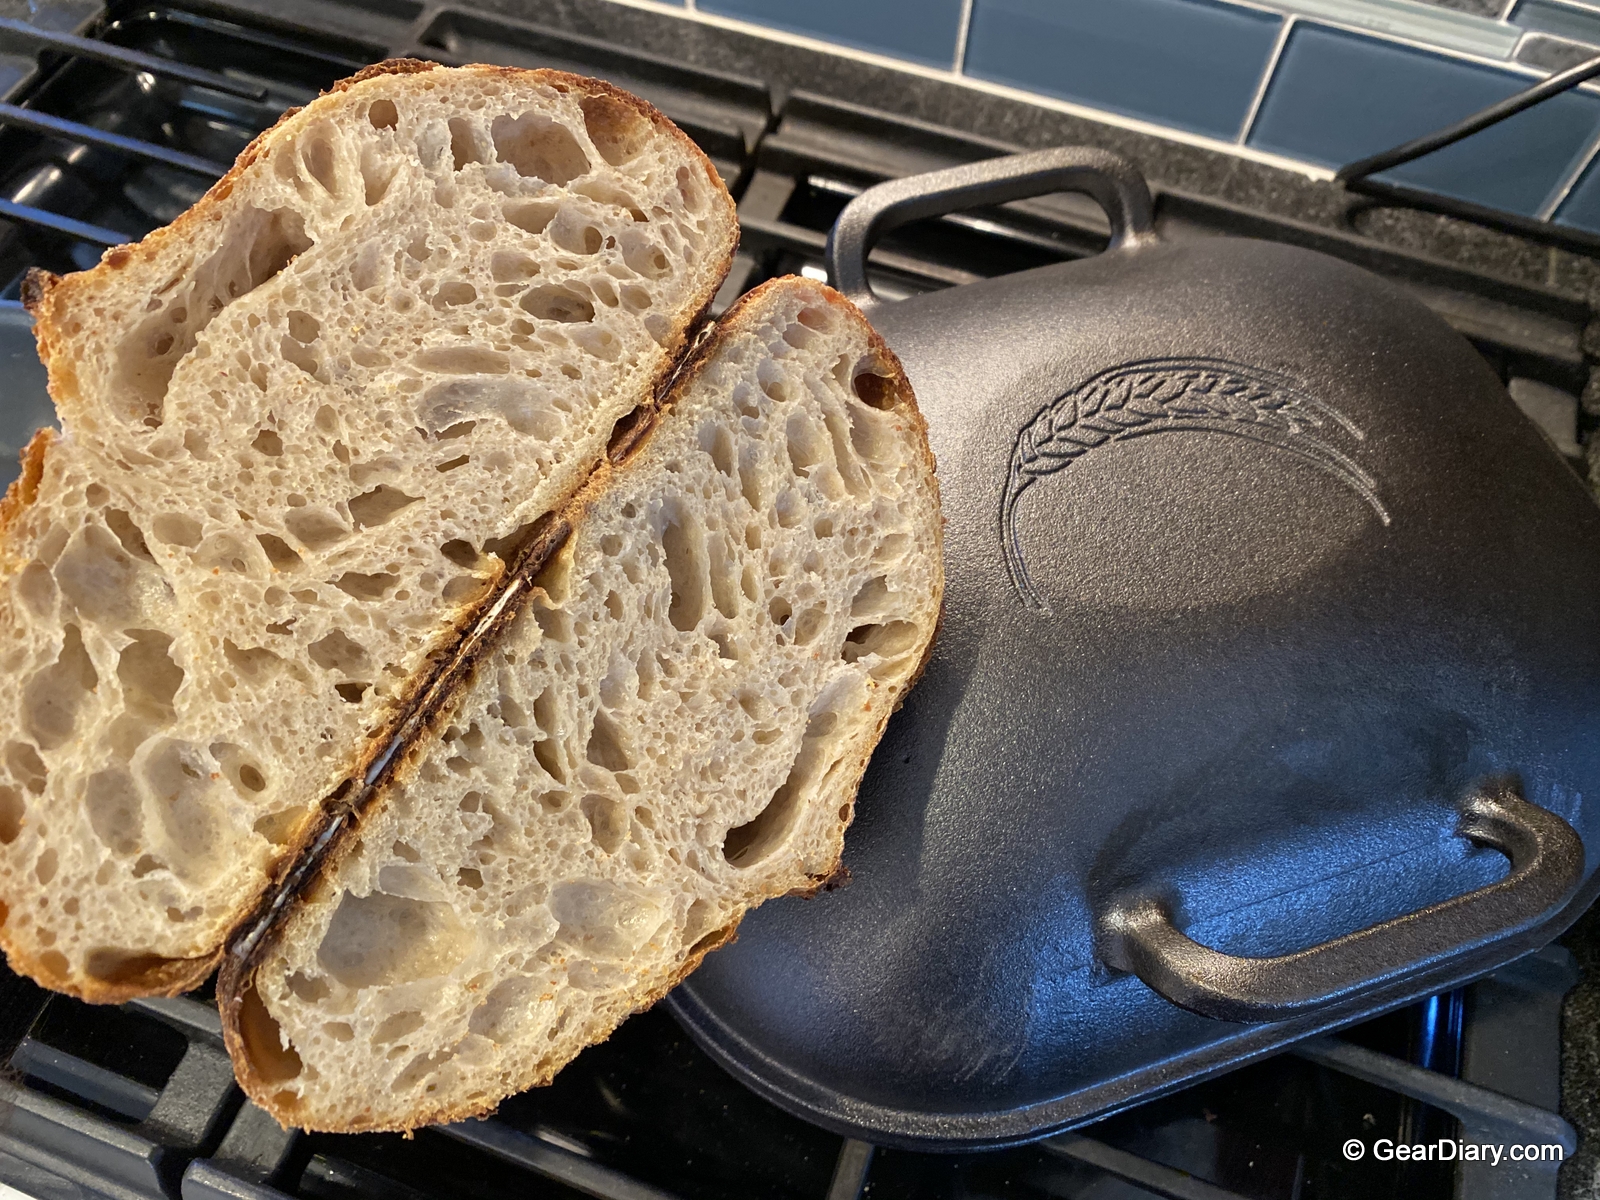 It's a new year, so that means new - Challenger Breadware